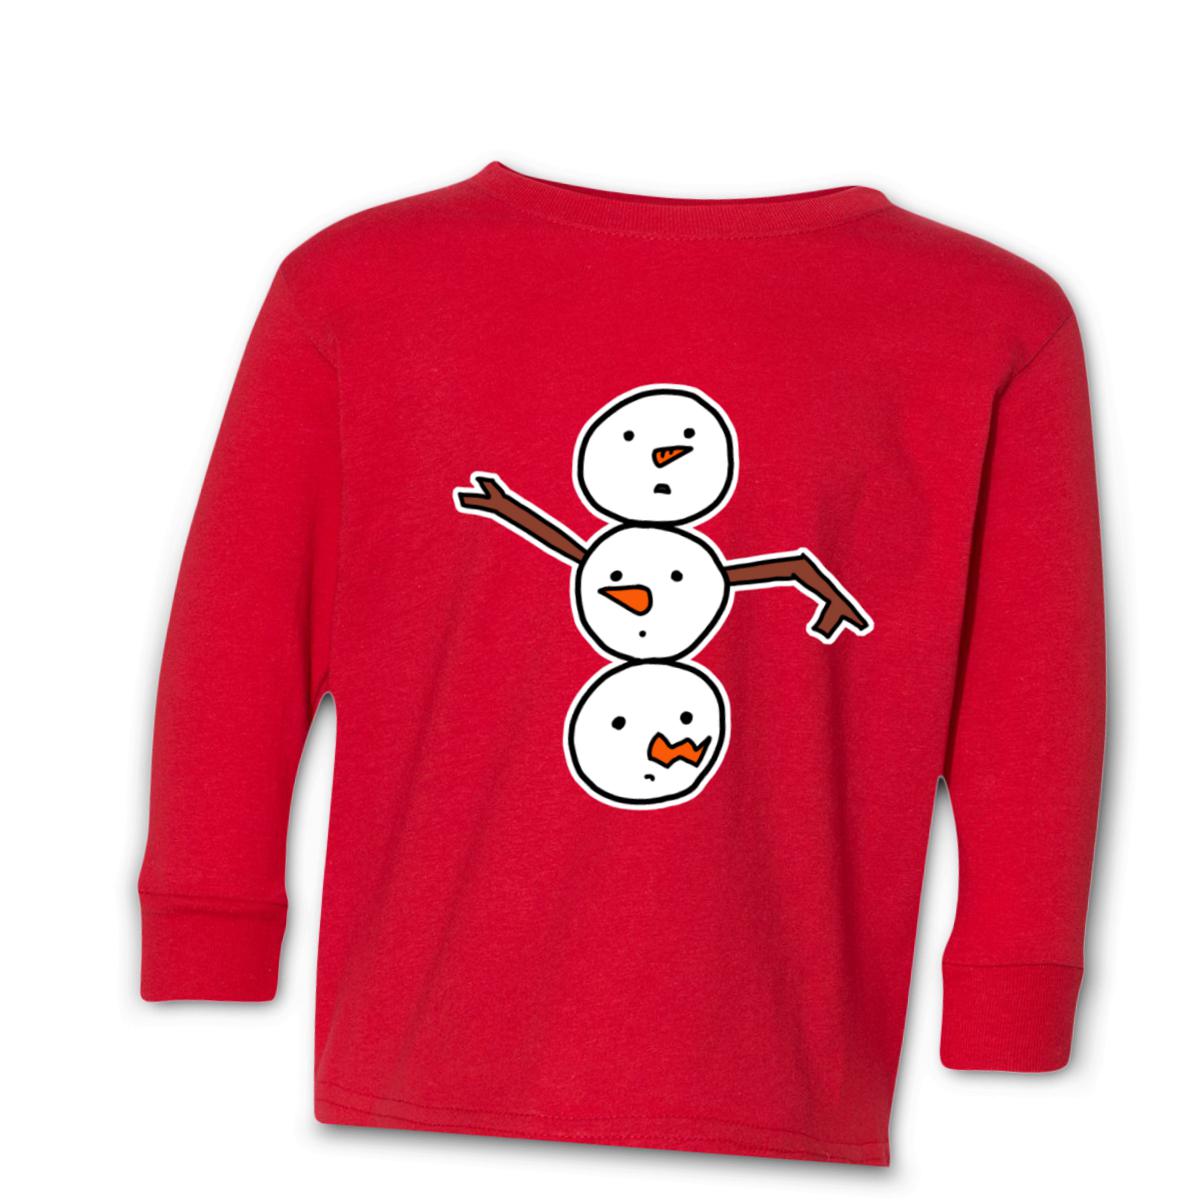 Snowman All Heads Toddler Long Sleeve Tee 2T red